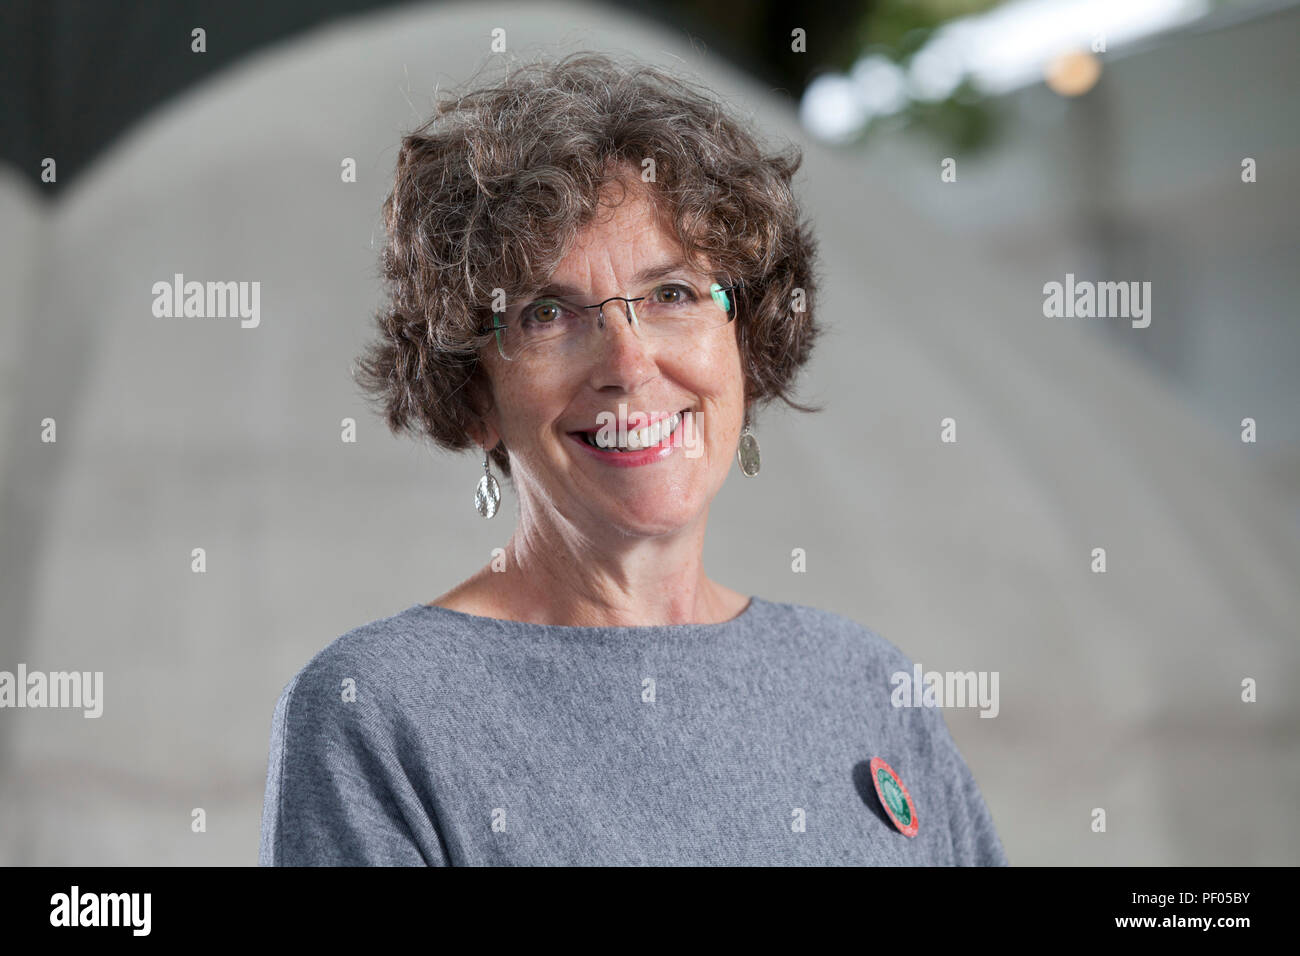 Edinburgh, UK. 18th August, 2018. Jane Robinson is a British social historian specialising in the study of women pioneers in various fields. Pictured at the Edinburgh International Book Festival. Edinburgh, Scotland.  Picture by Gary Doak / Alamy Live News Stock Photo